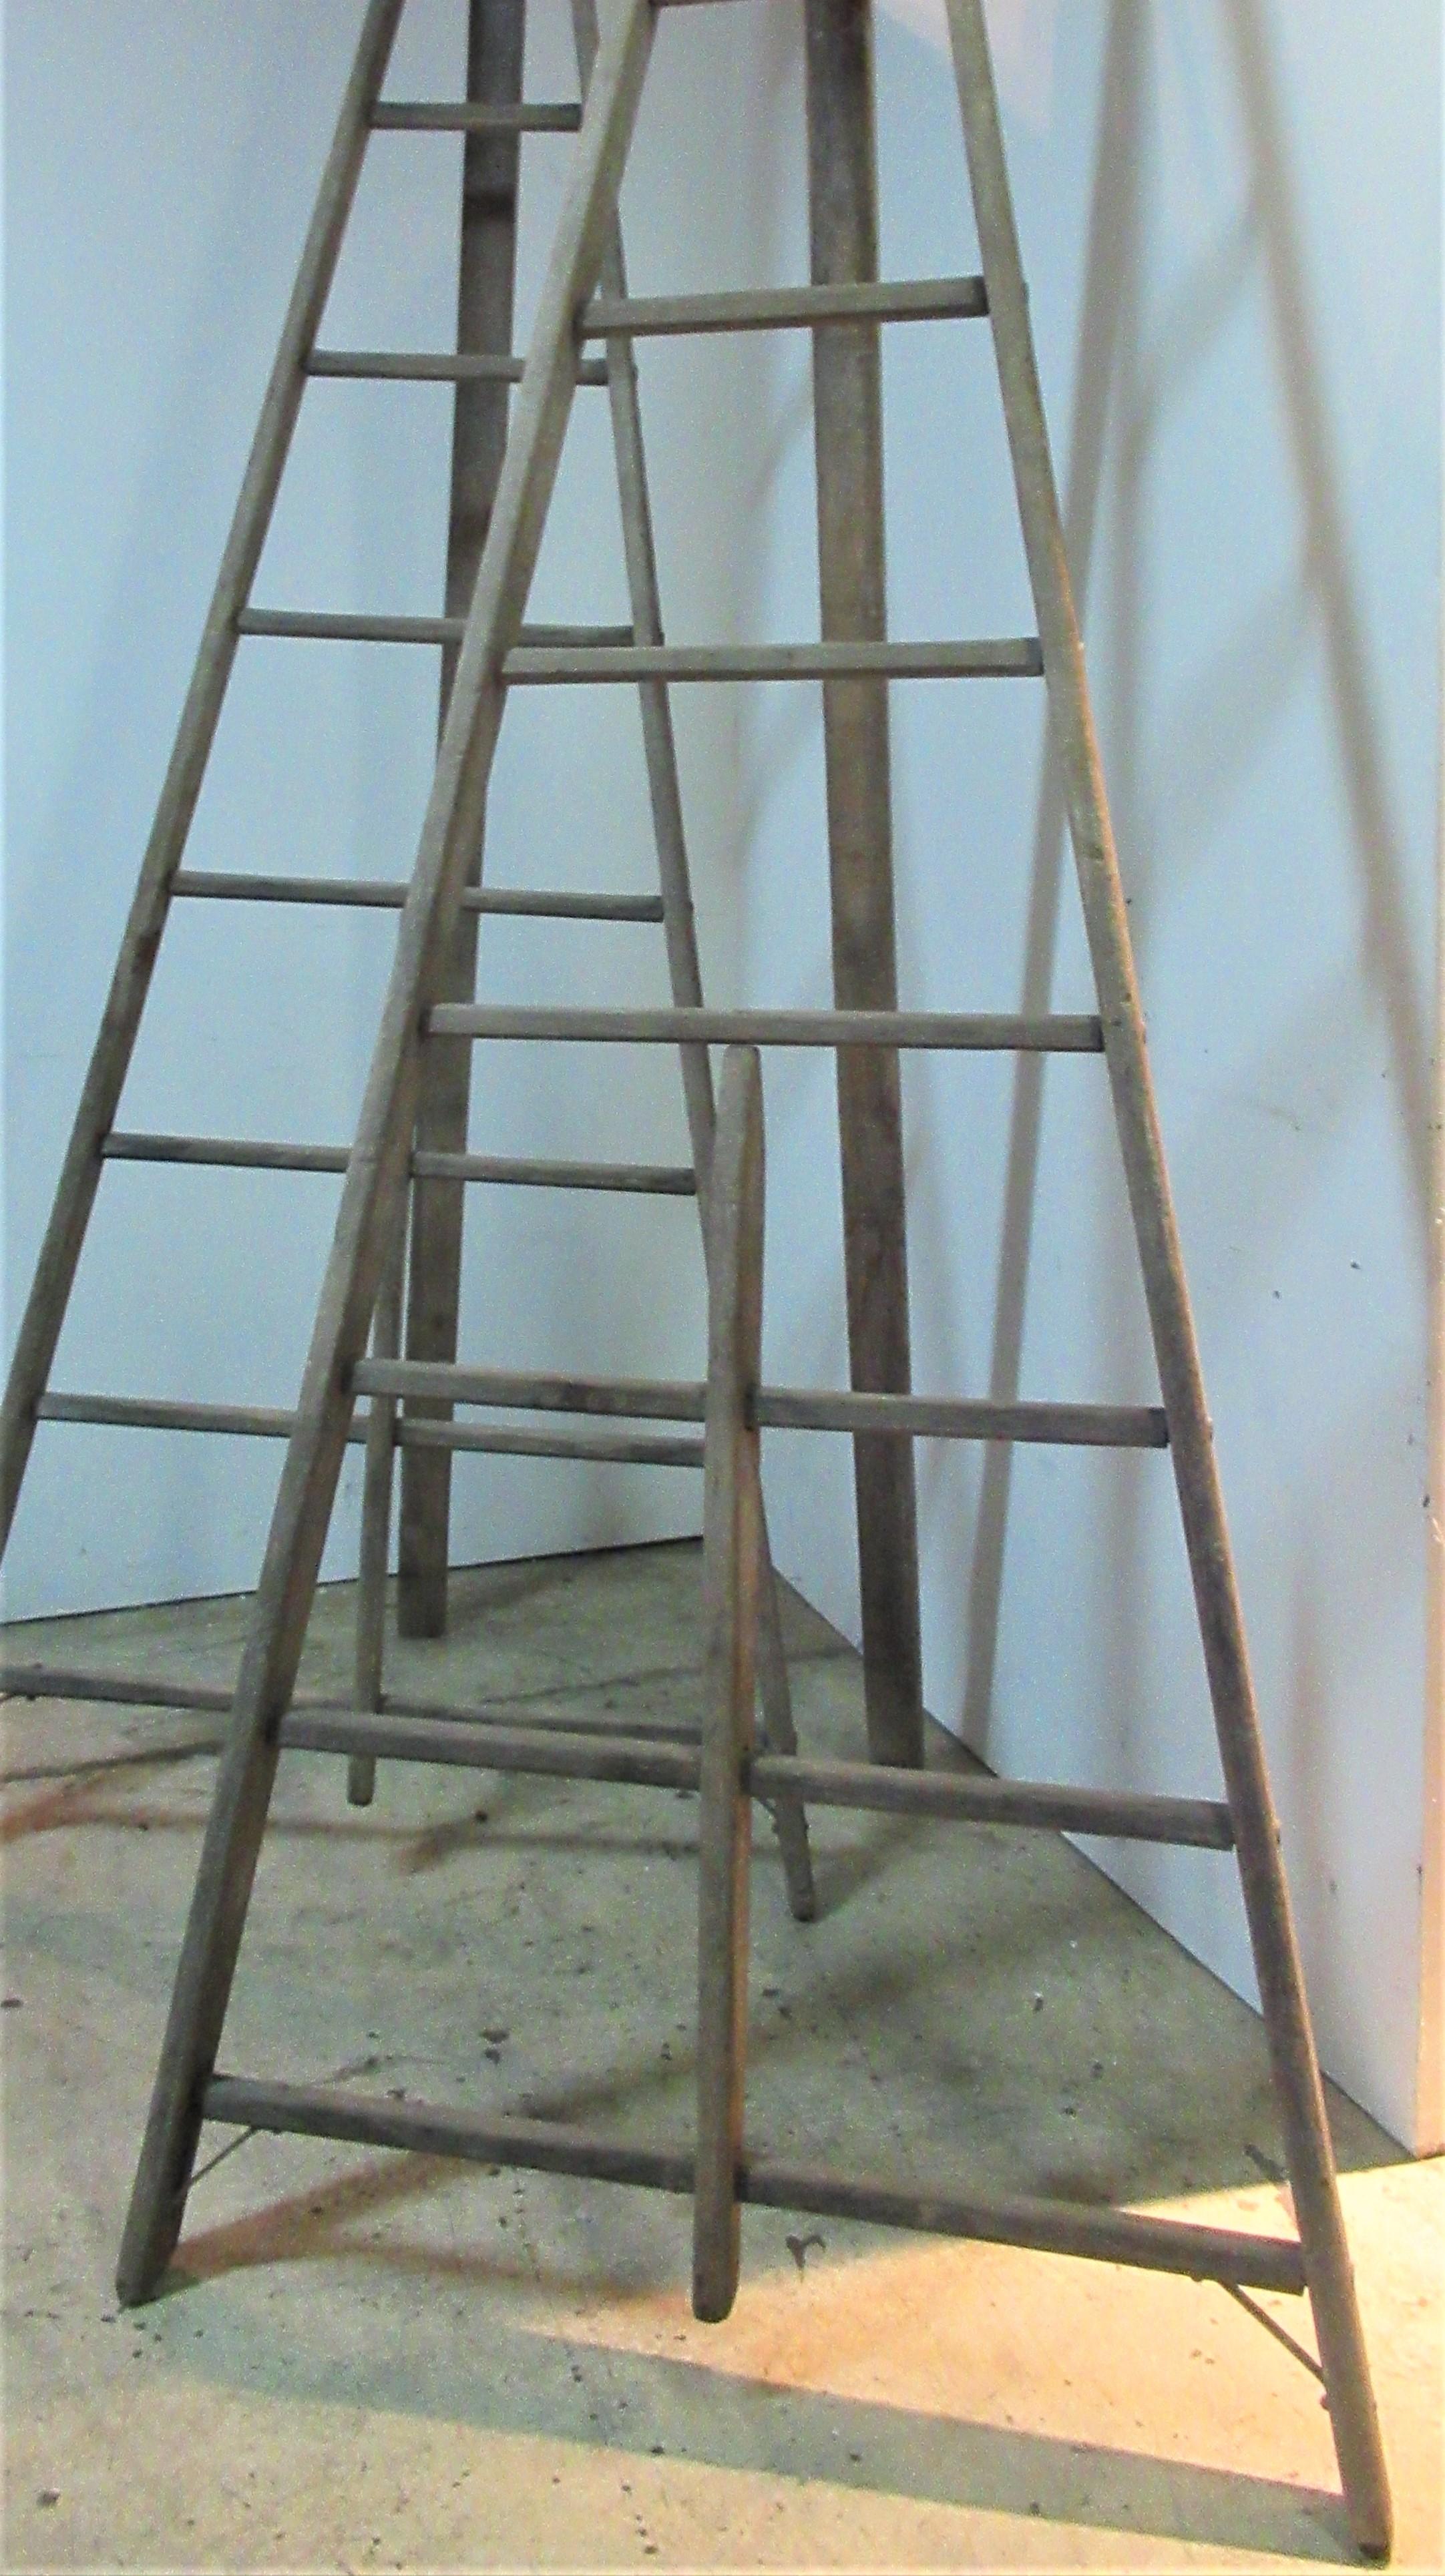 Antique American a frame peak top folding harvest ladders constructed of wood and riveted iron in overall beautifully aged old gray weathered surface. These are from a now closed old fruit farm orchard of the Lake Ontario region New York State,